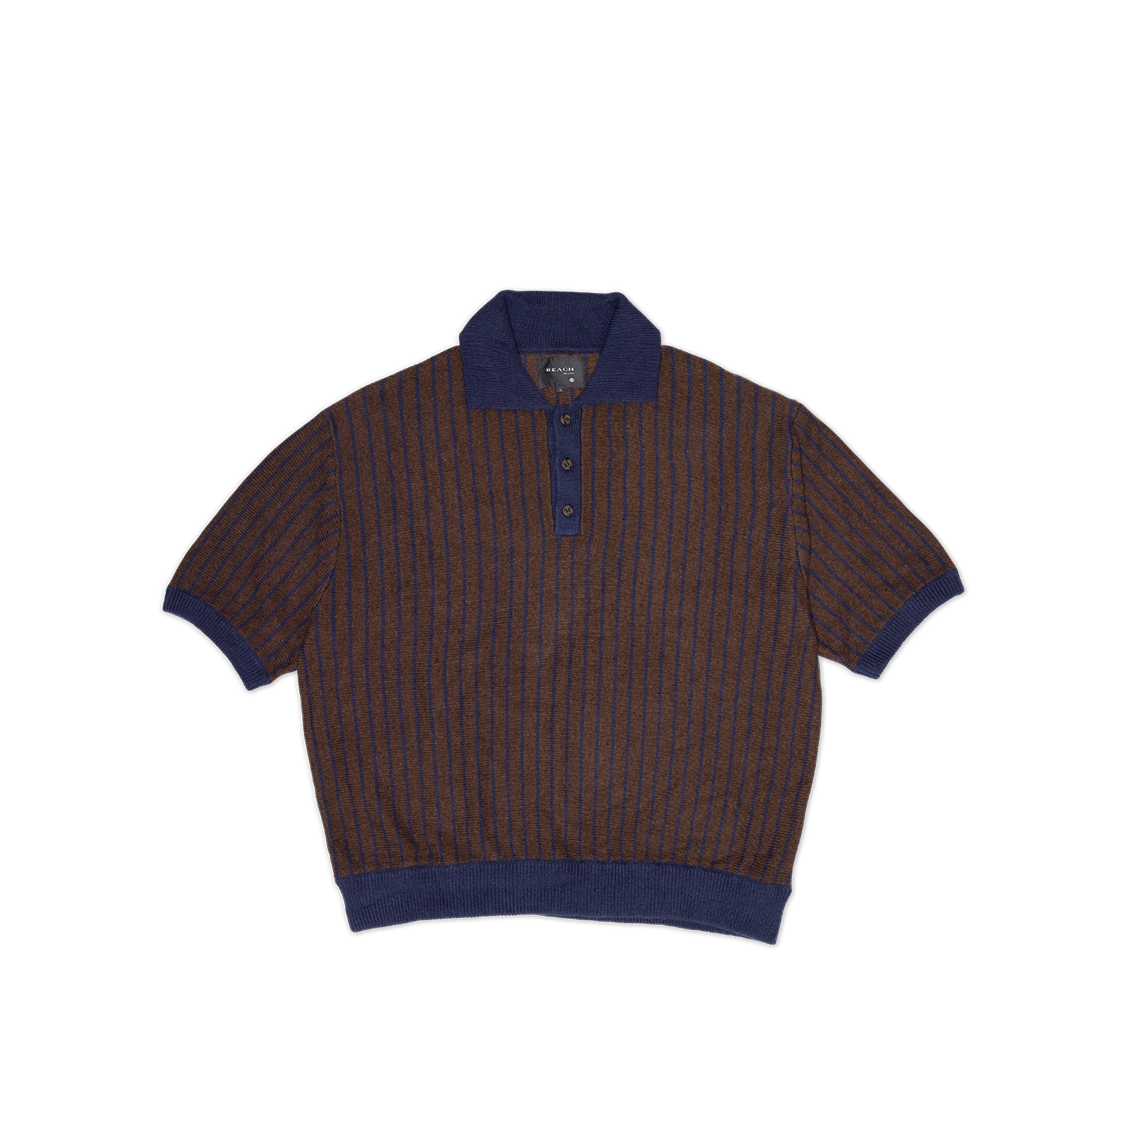 KNIT POLO - BROWN/NAVY